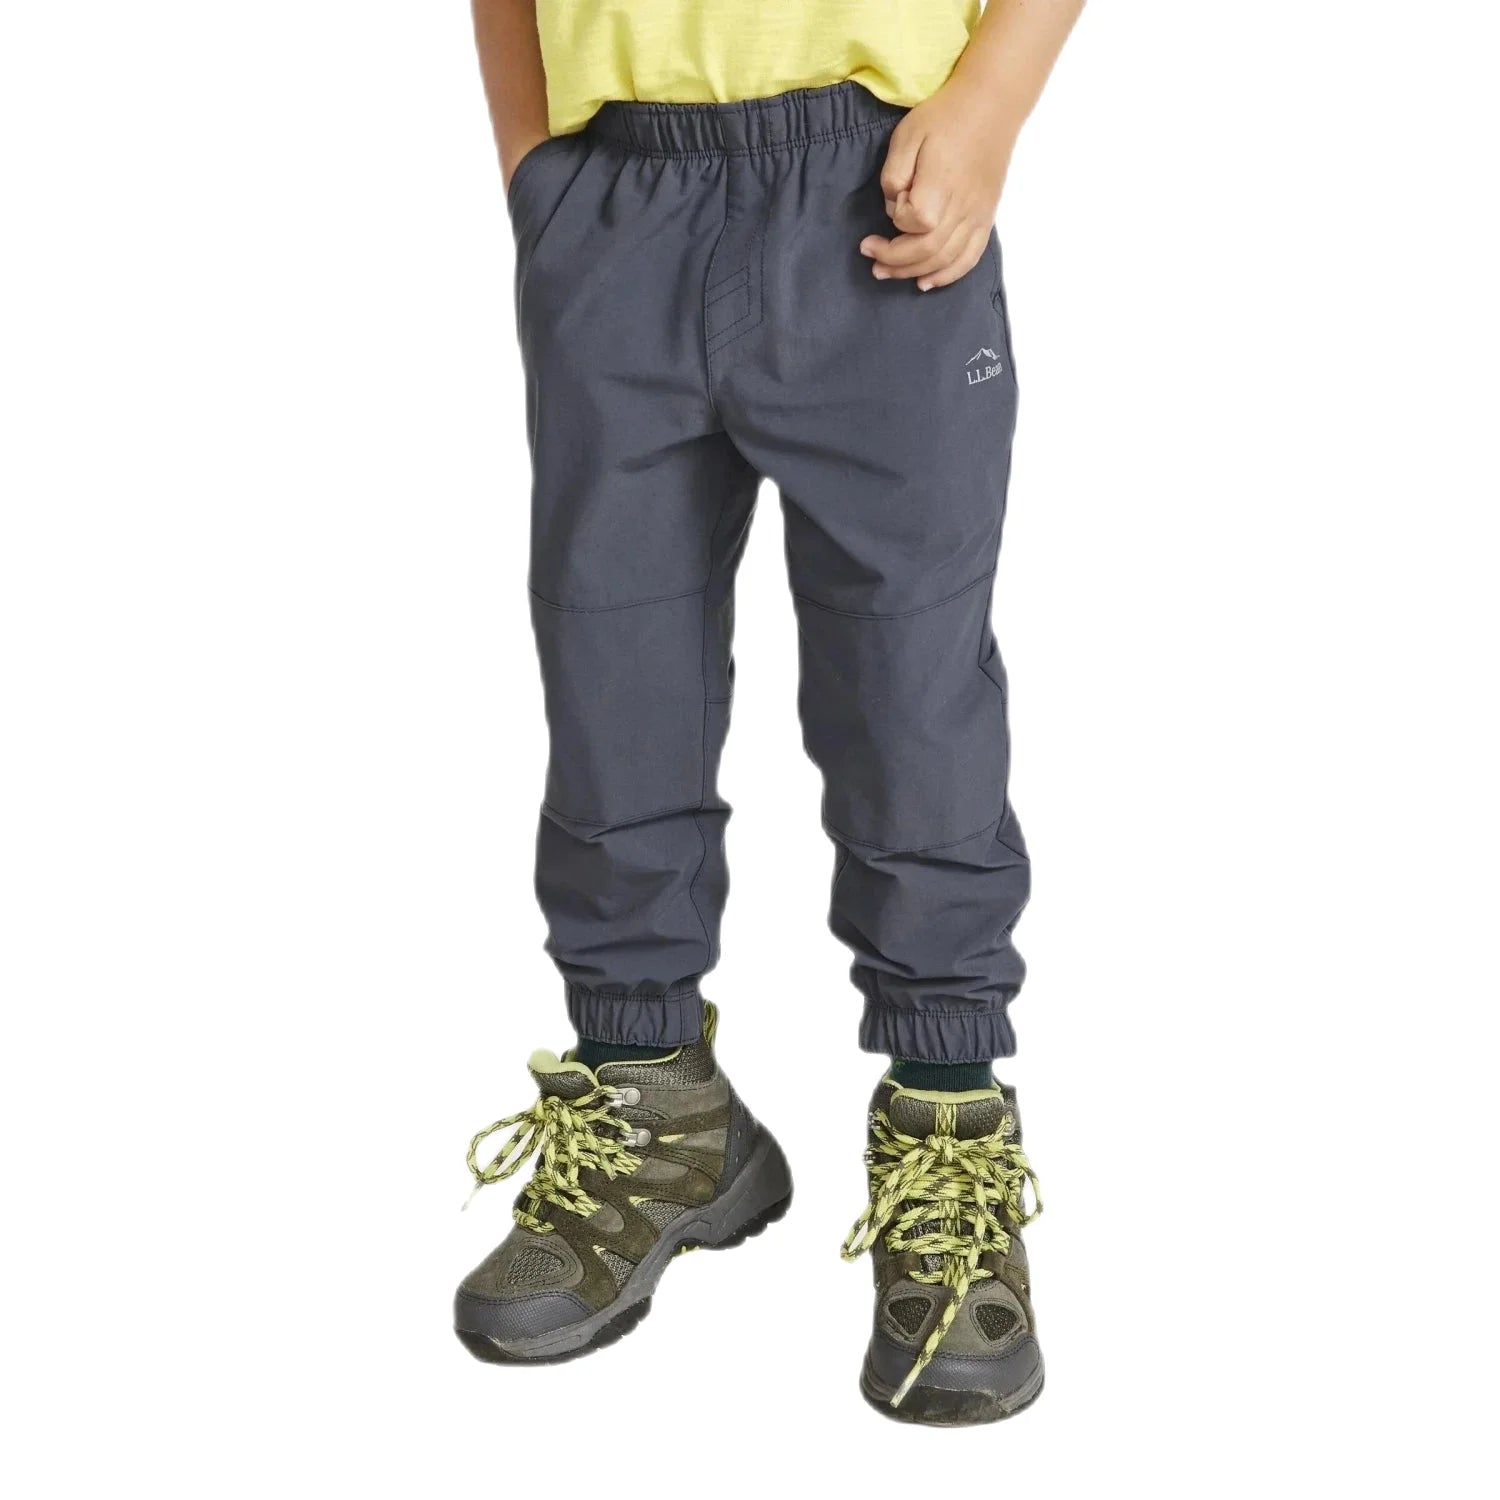 LL Bean Toddlers' Cresta Hiking Joggers shown in the Carbon Navy color option, Front view on model.